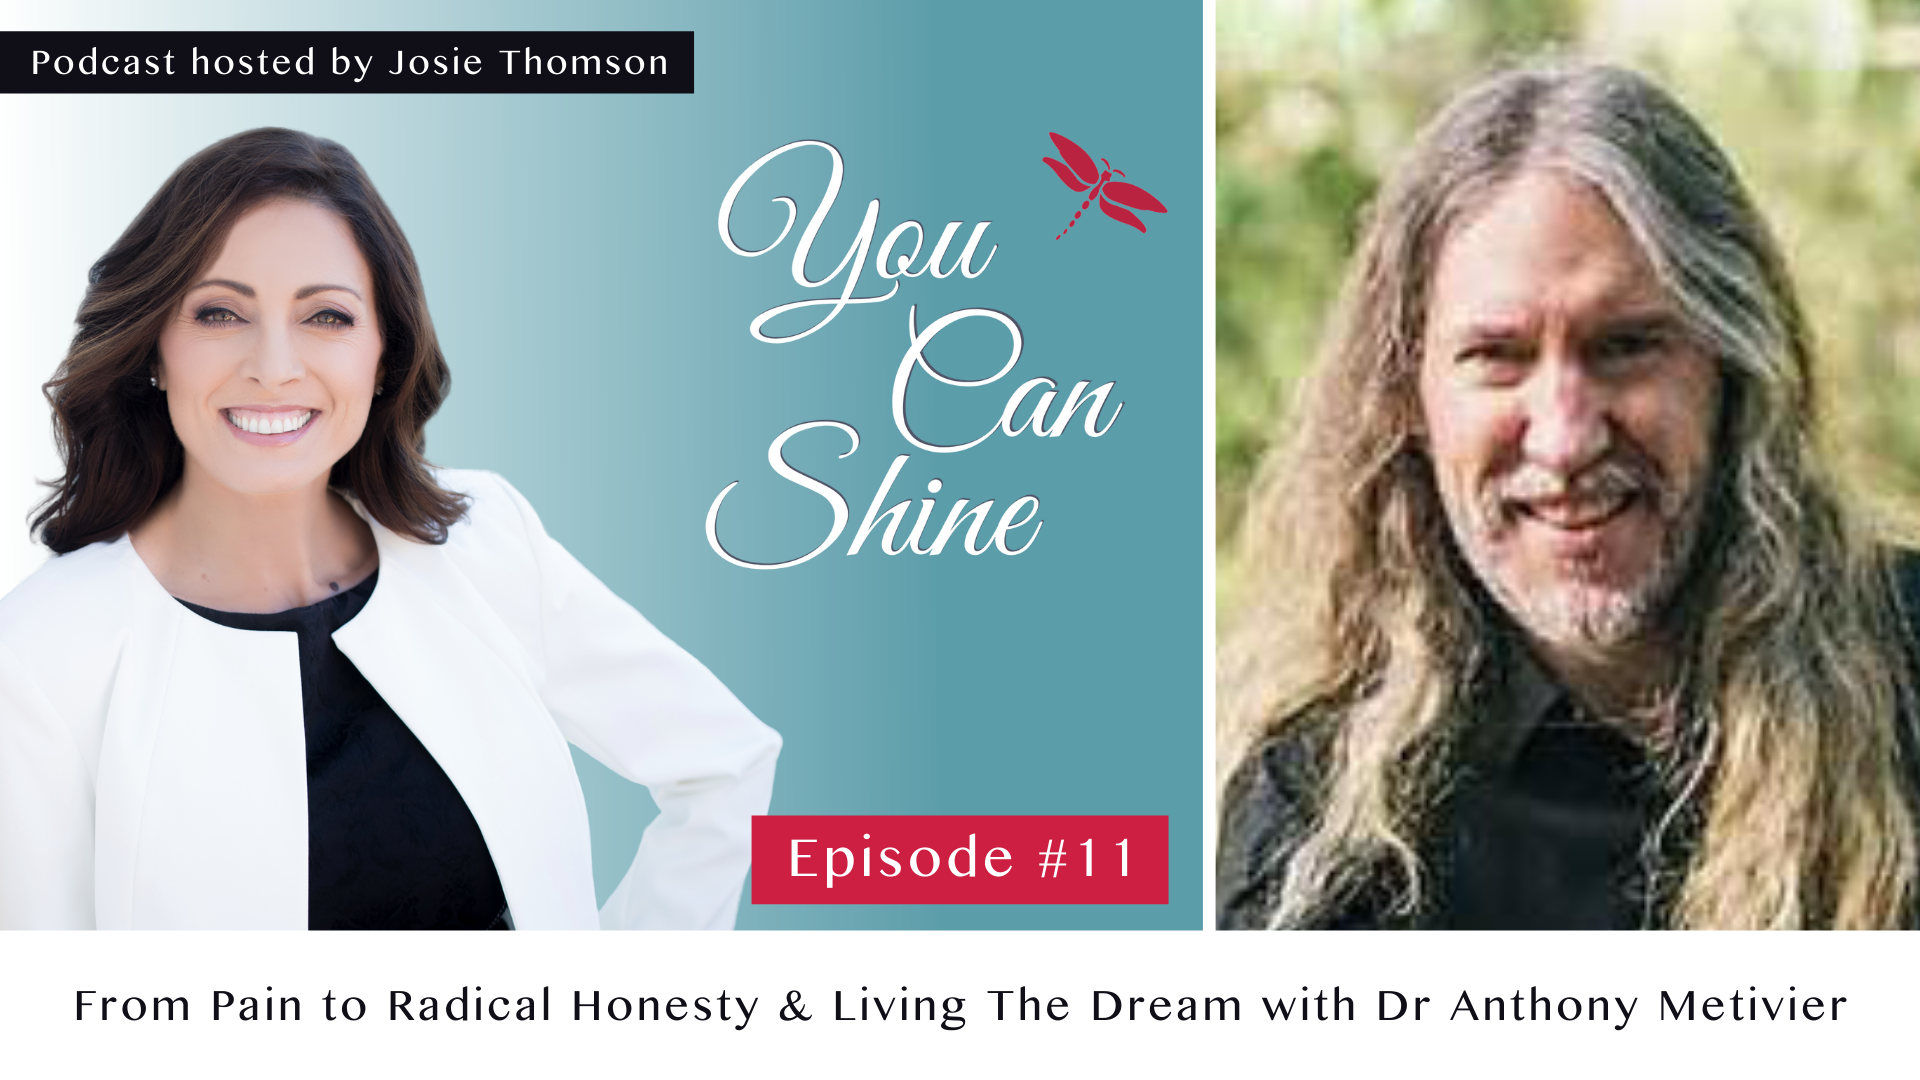 Episode 11 - From Pain to Radical Honesty & Living The Dream with